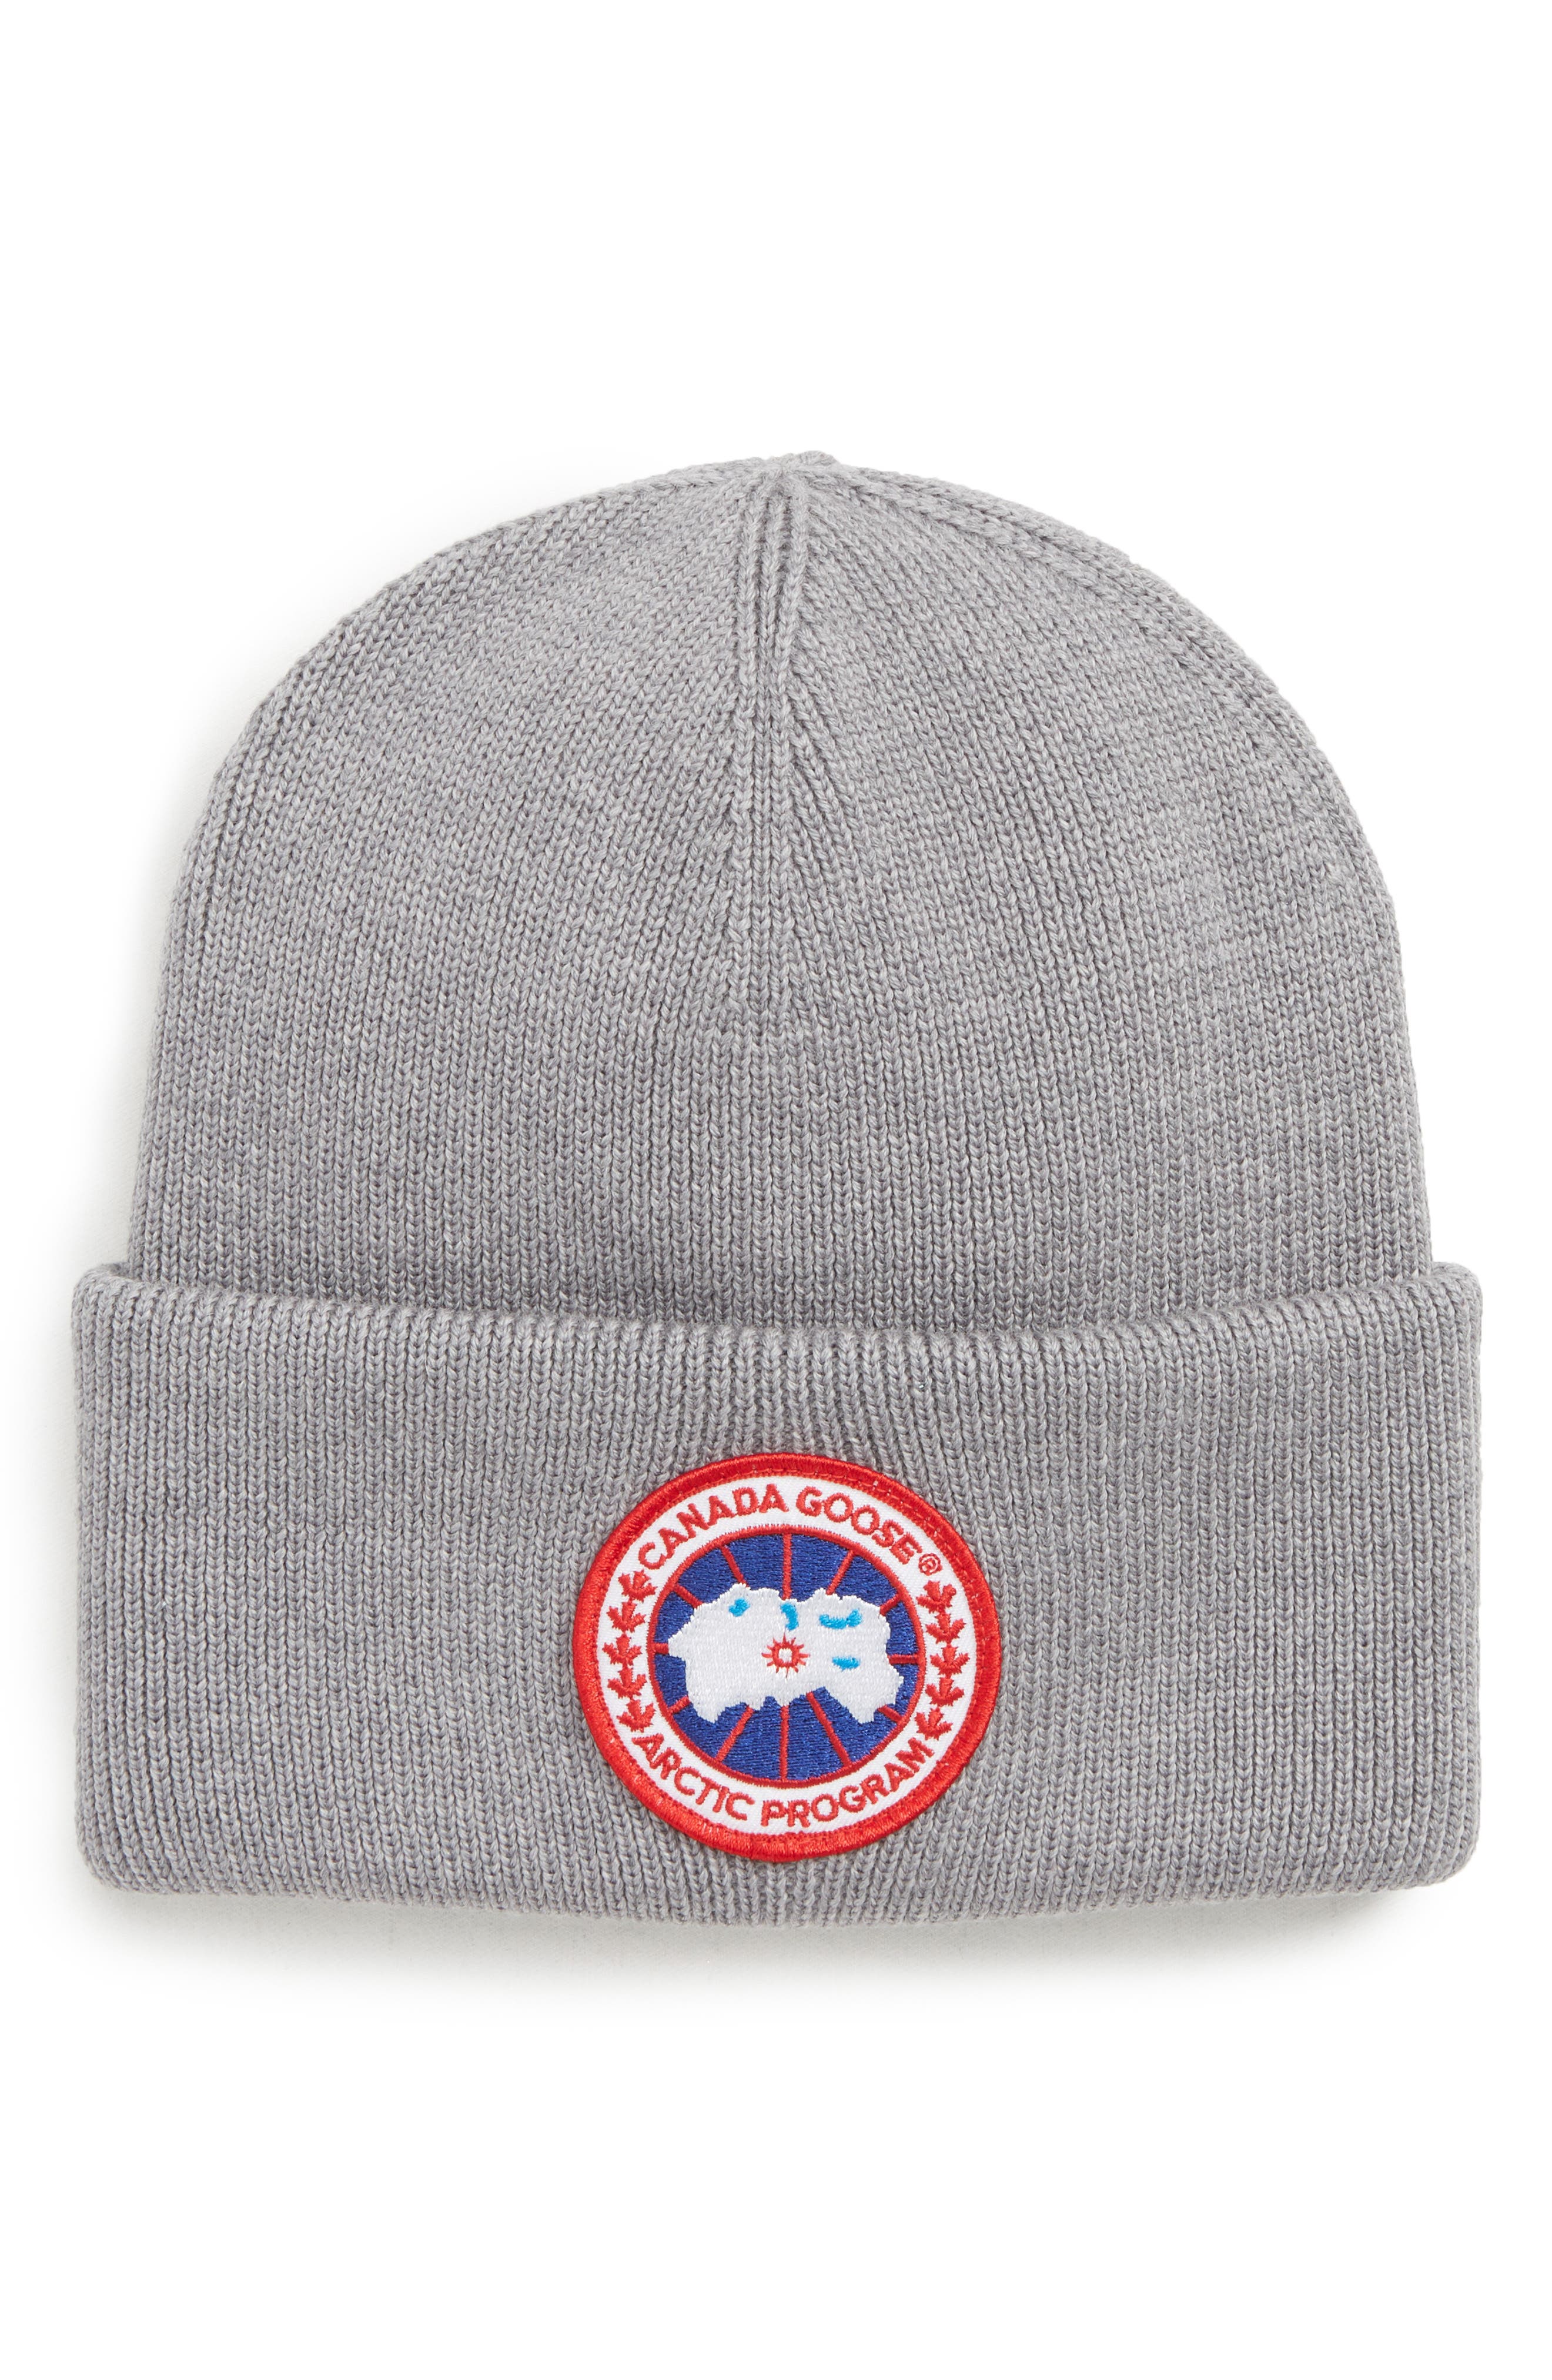 Red Save 60% Canada Goose Wool Arctic Beanie Cap in Pink Mens Hats Canada Goose Hats for Men 